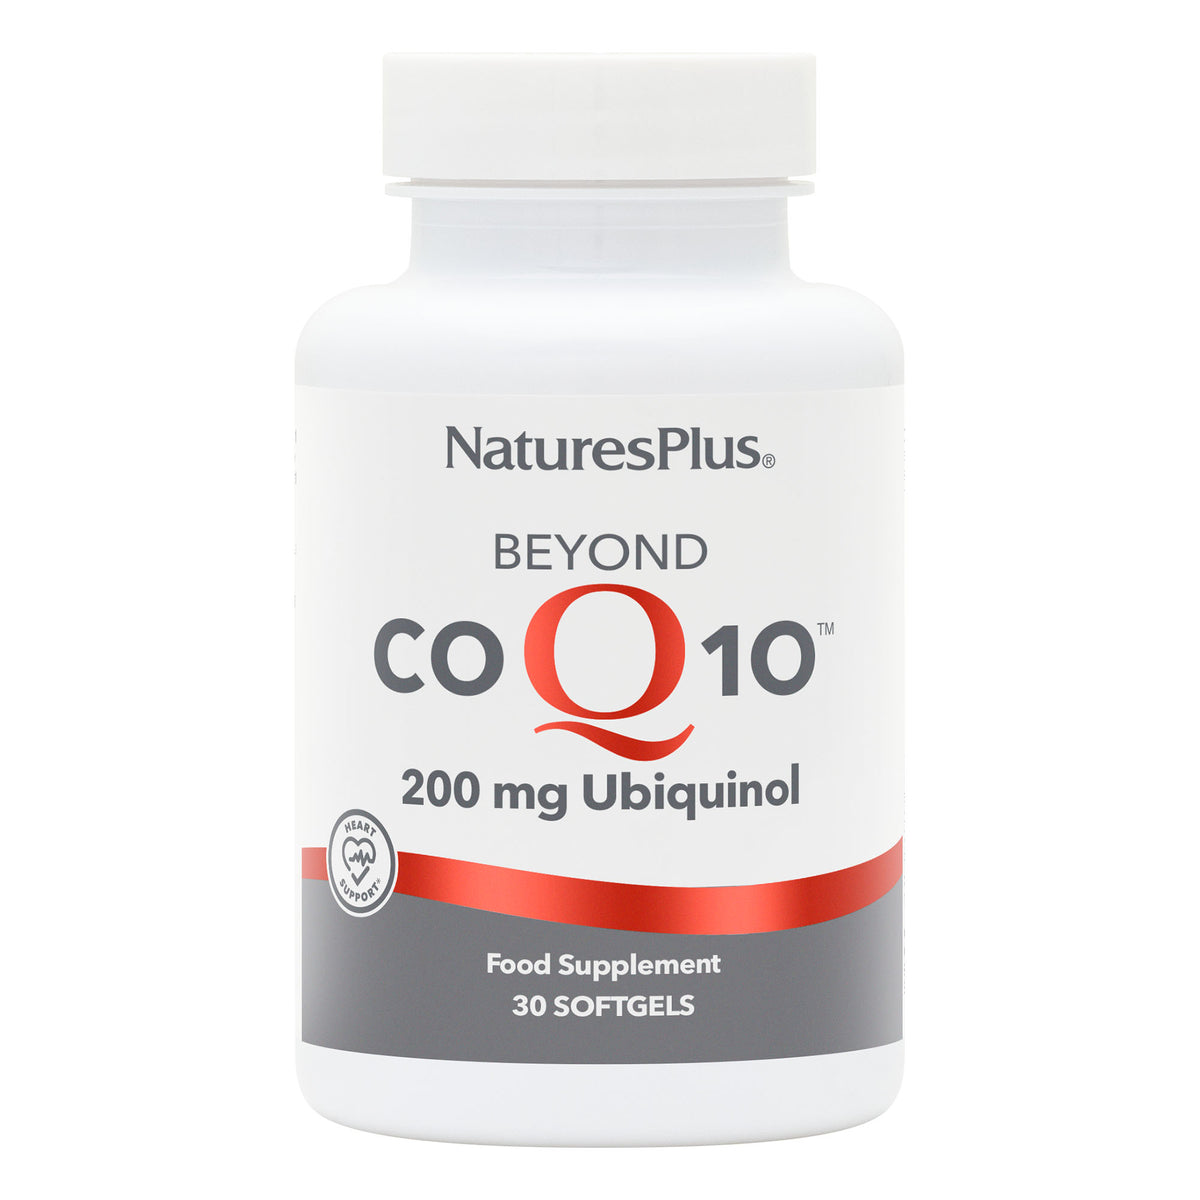 product image of Beyond CoQ10® Softgels containing 30 Count